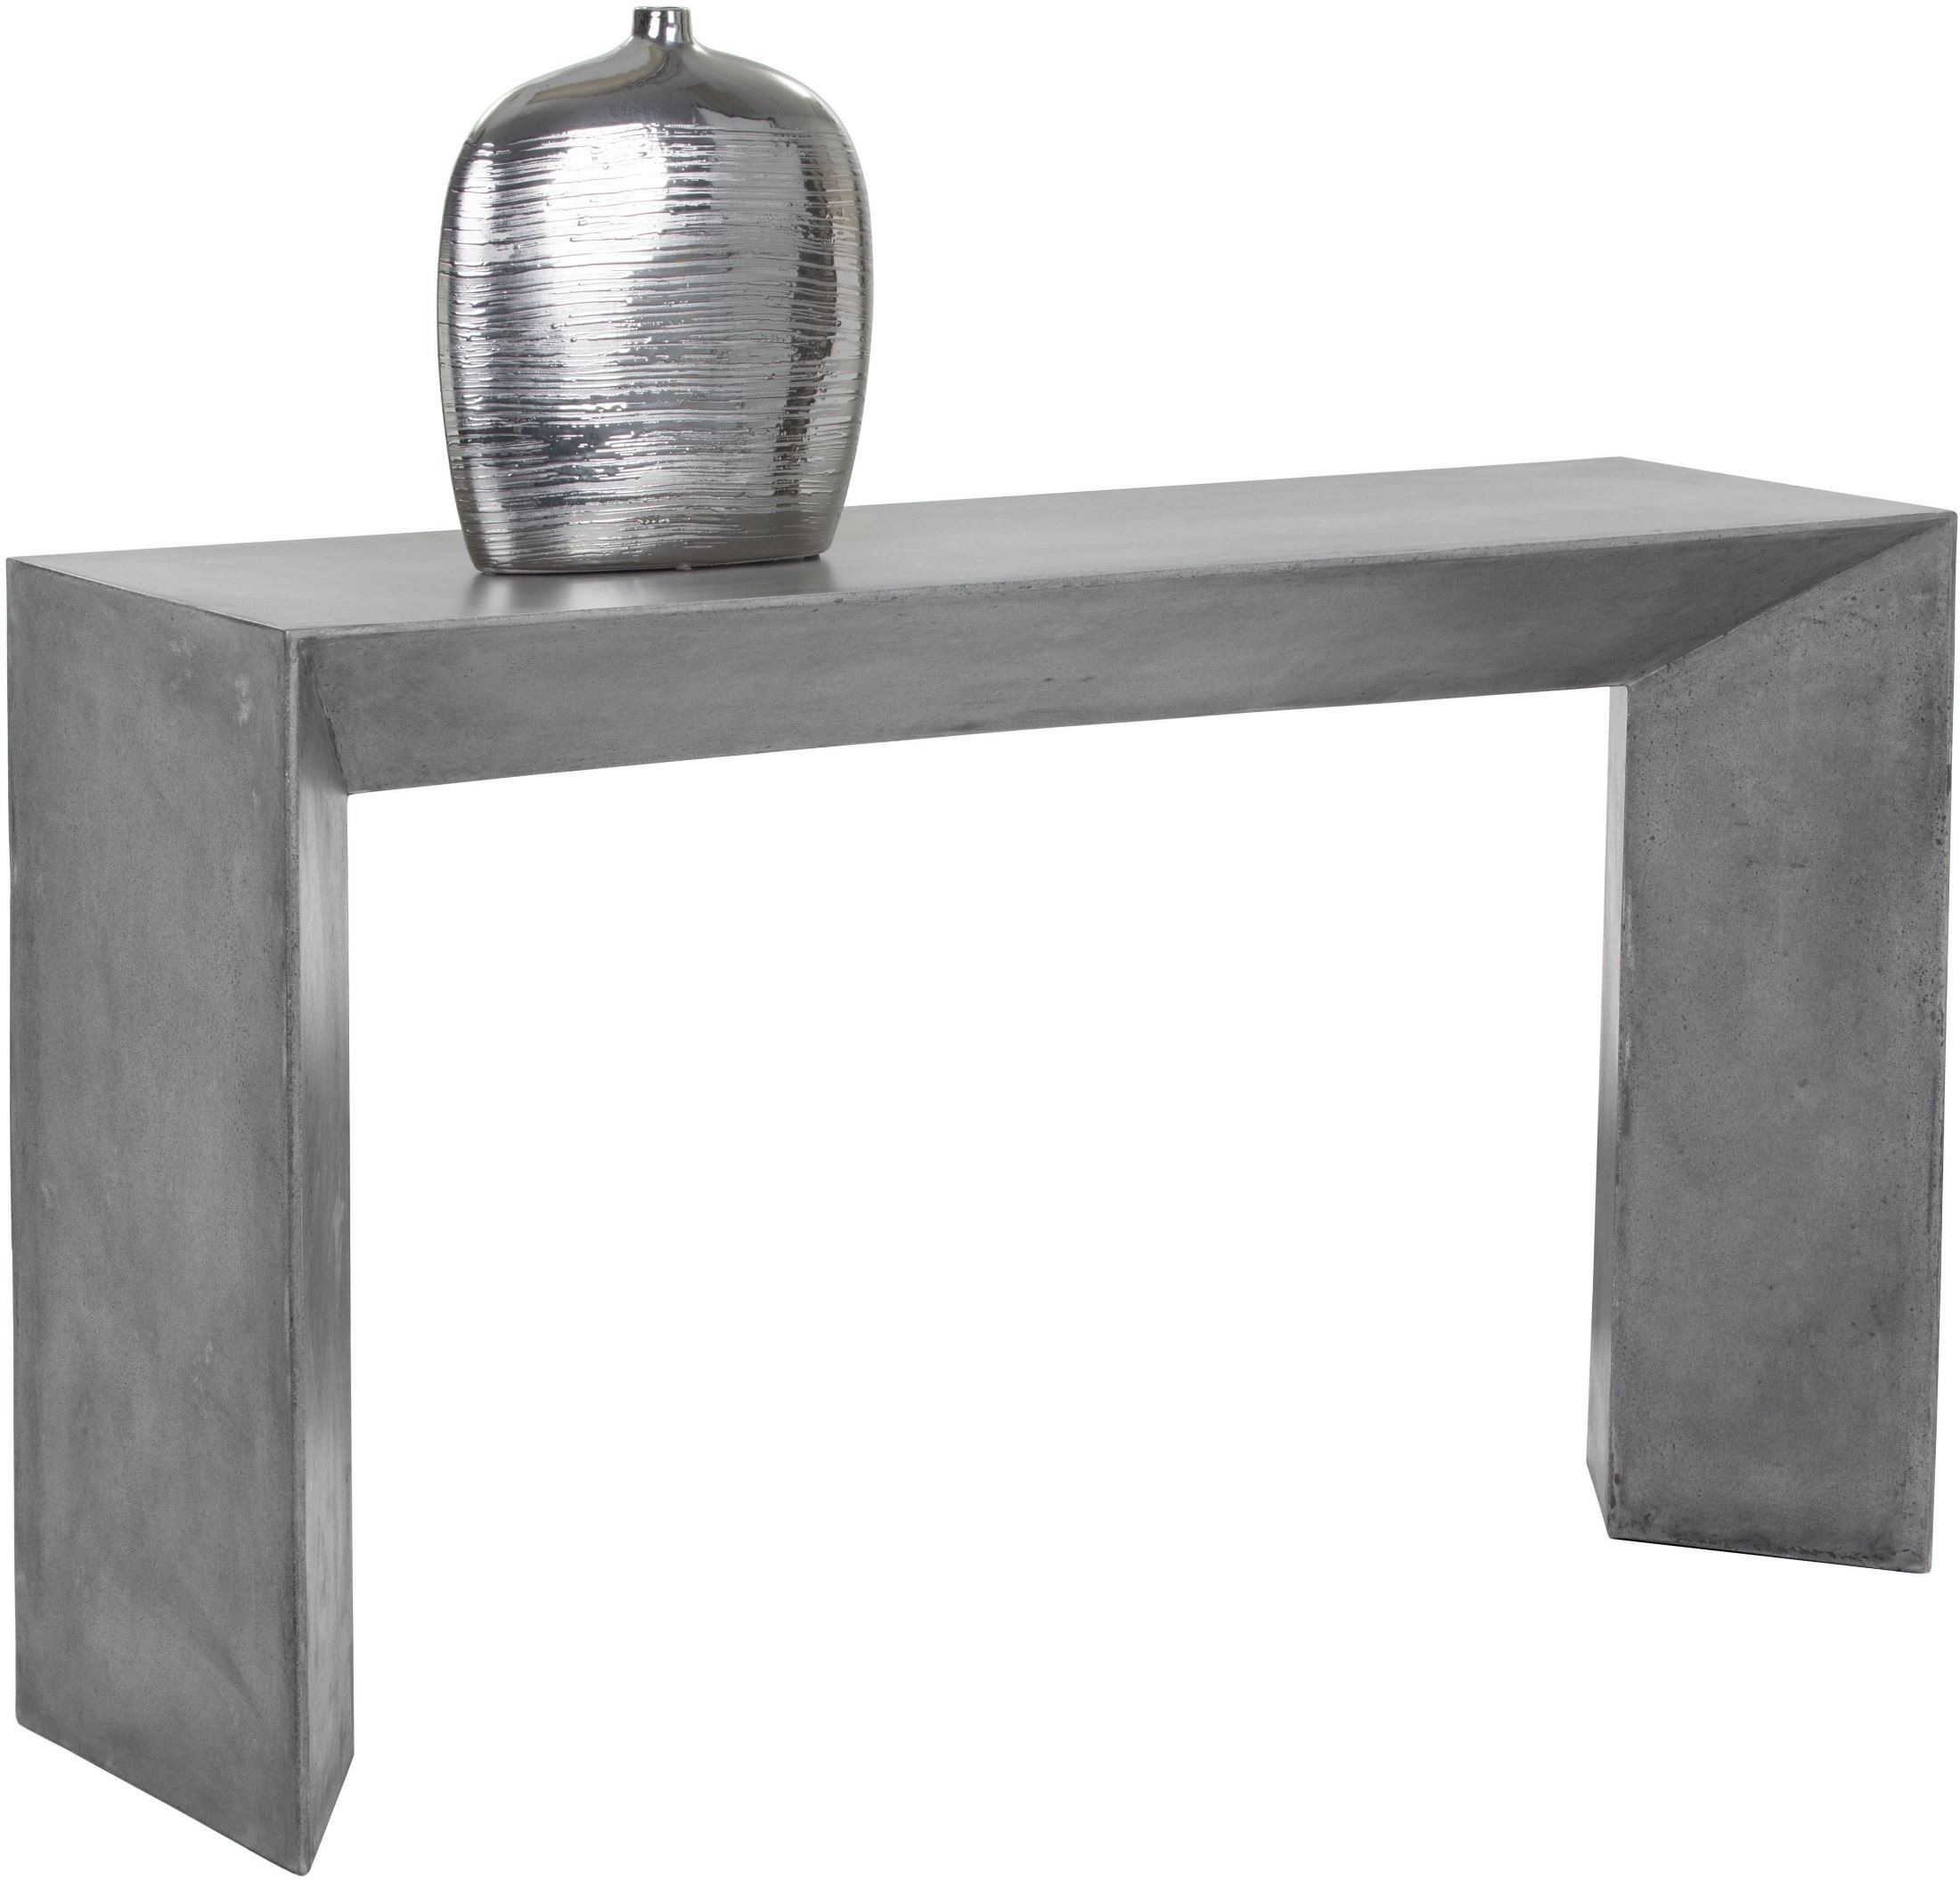 Nomad Grey Concrete Console Table From Sunpan | Coleman Furniture With Gray And Black Console Tables (Gallery 20 of 20)